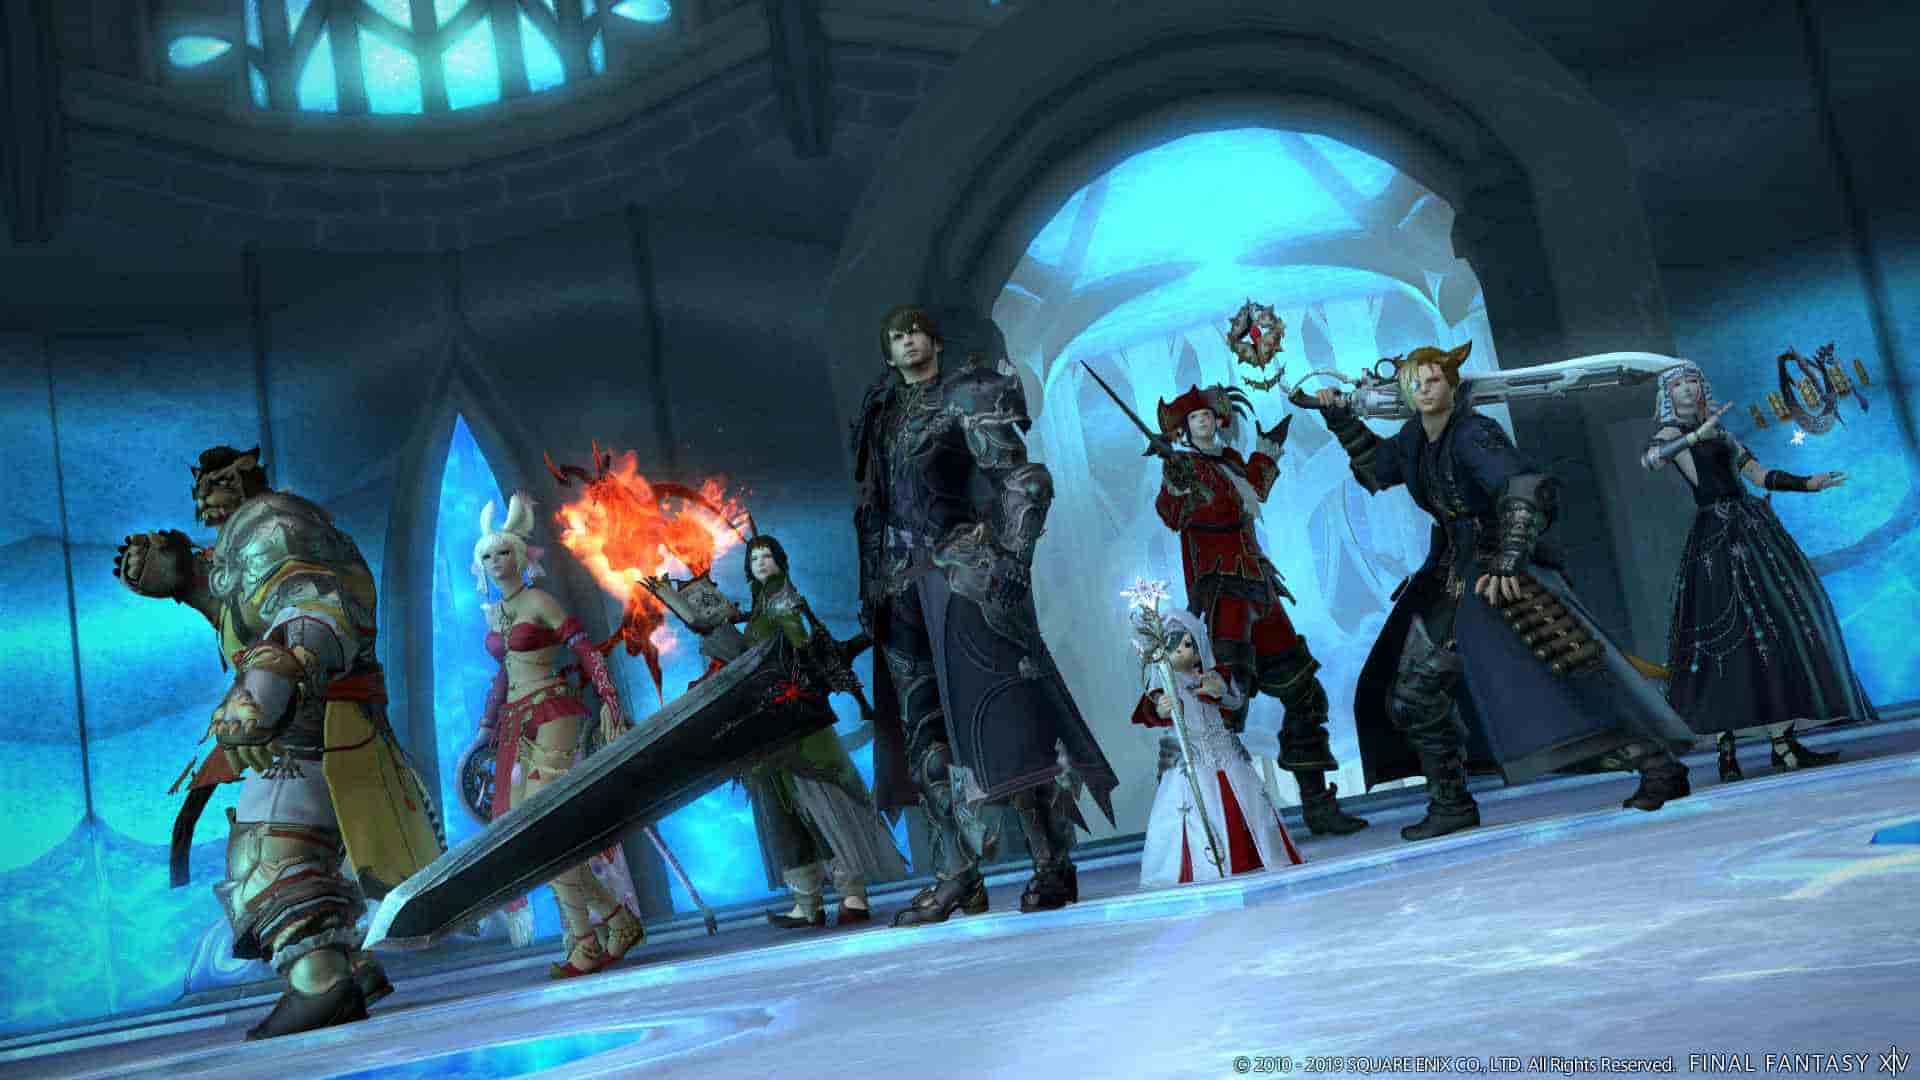 Final Fantasy Xiv Update 8 64 Hits Ps4 With A Wealth Of Game Fixes Playstation Universe